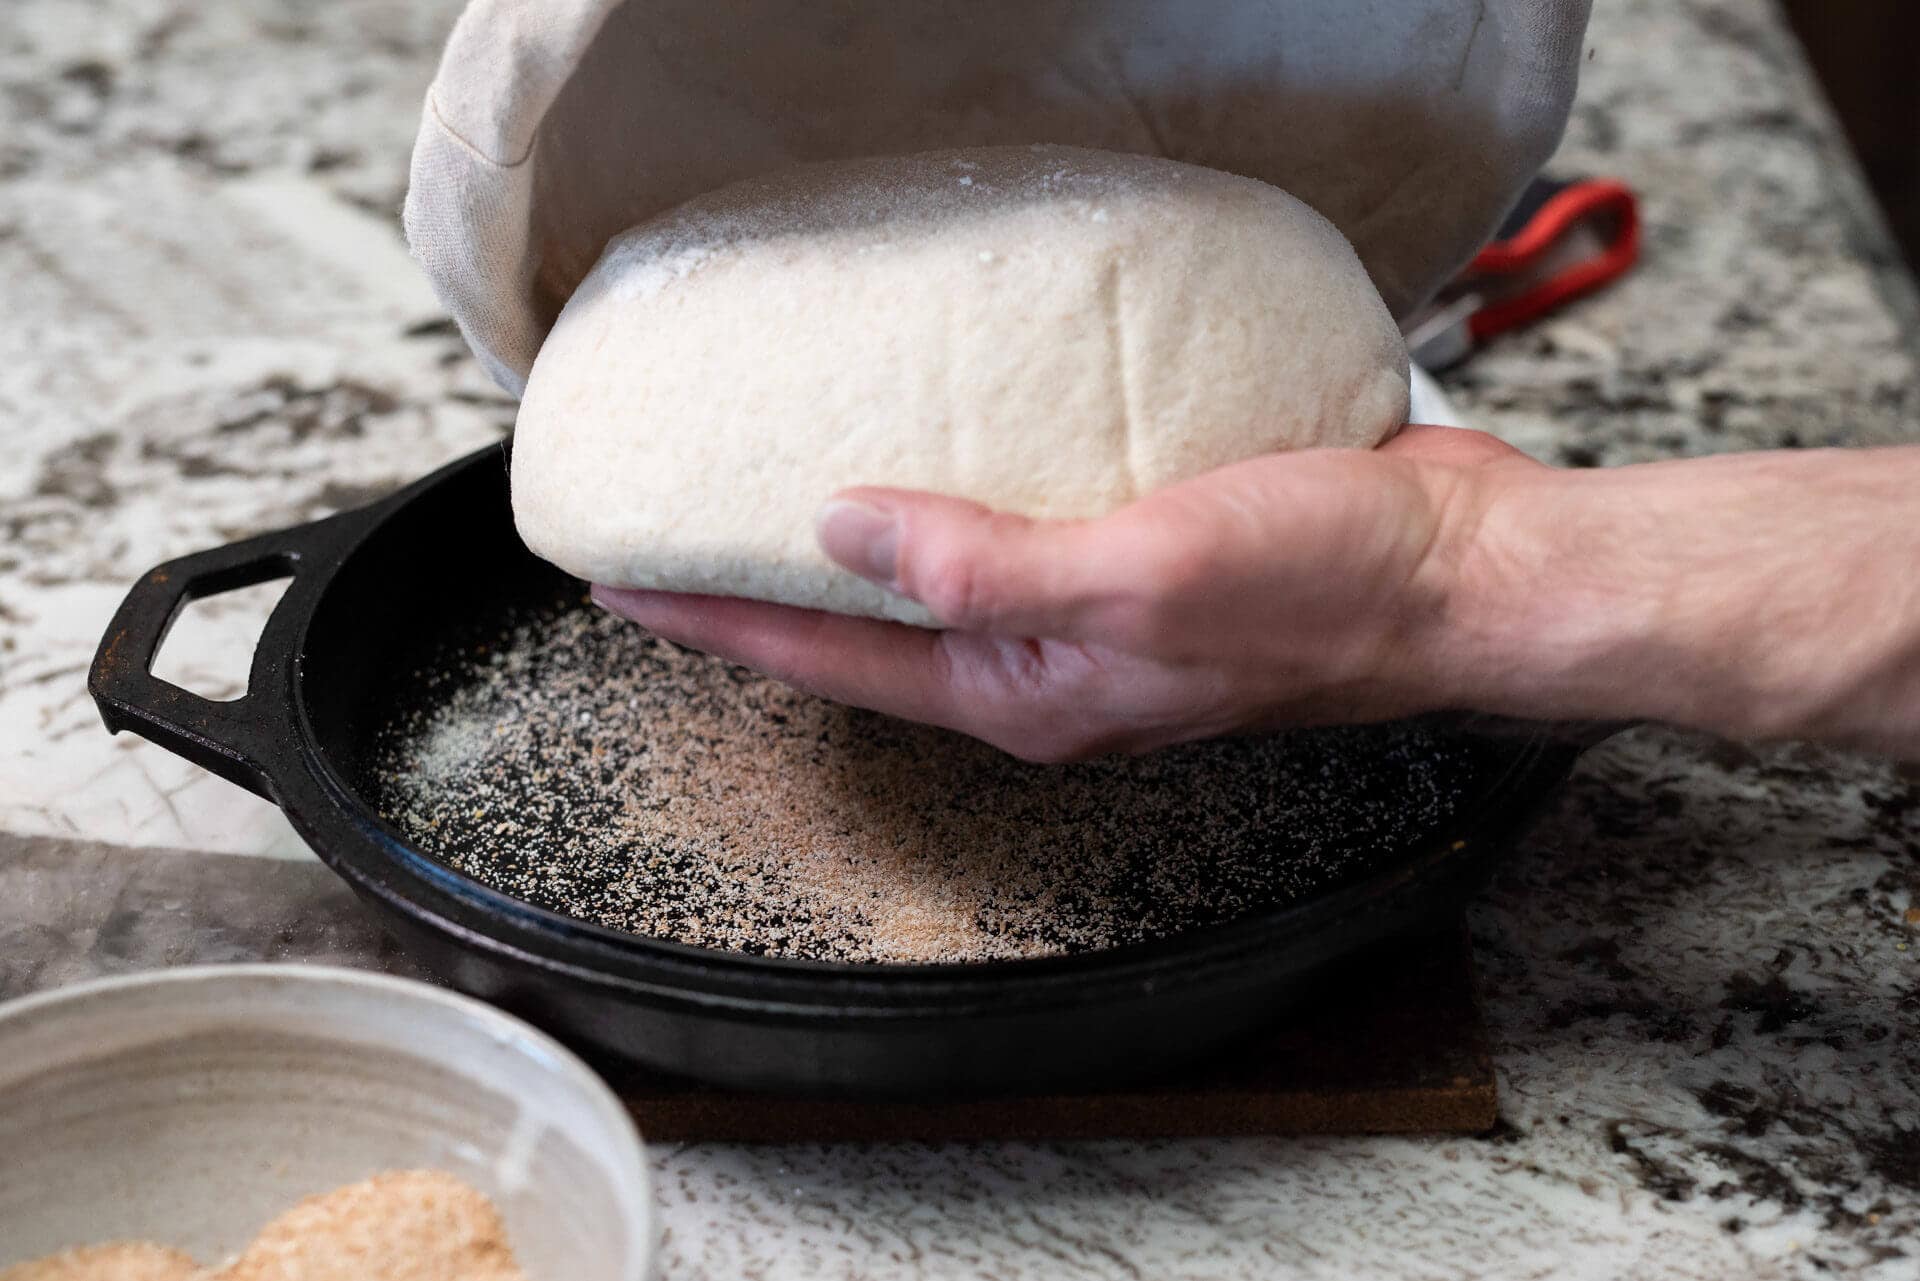 https://www.theperfectloaf.com/wp-content/uploads/2019/01/theperfectloaf-baking-bread-in-a-dutch-oven-feature-13-1920x1281.jpg